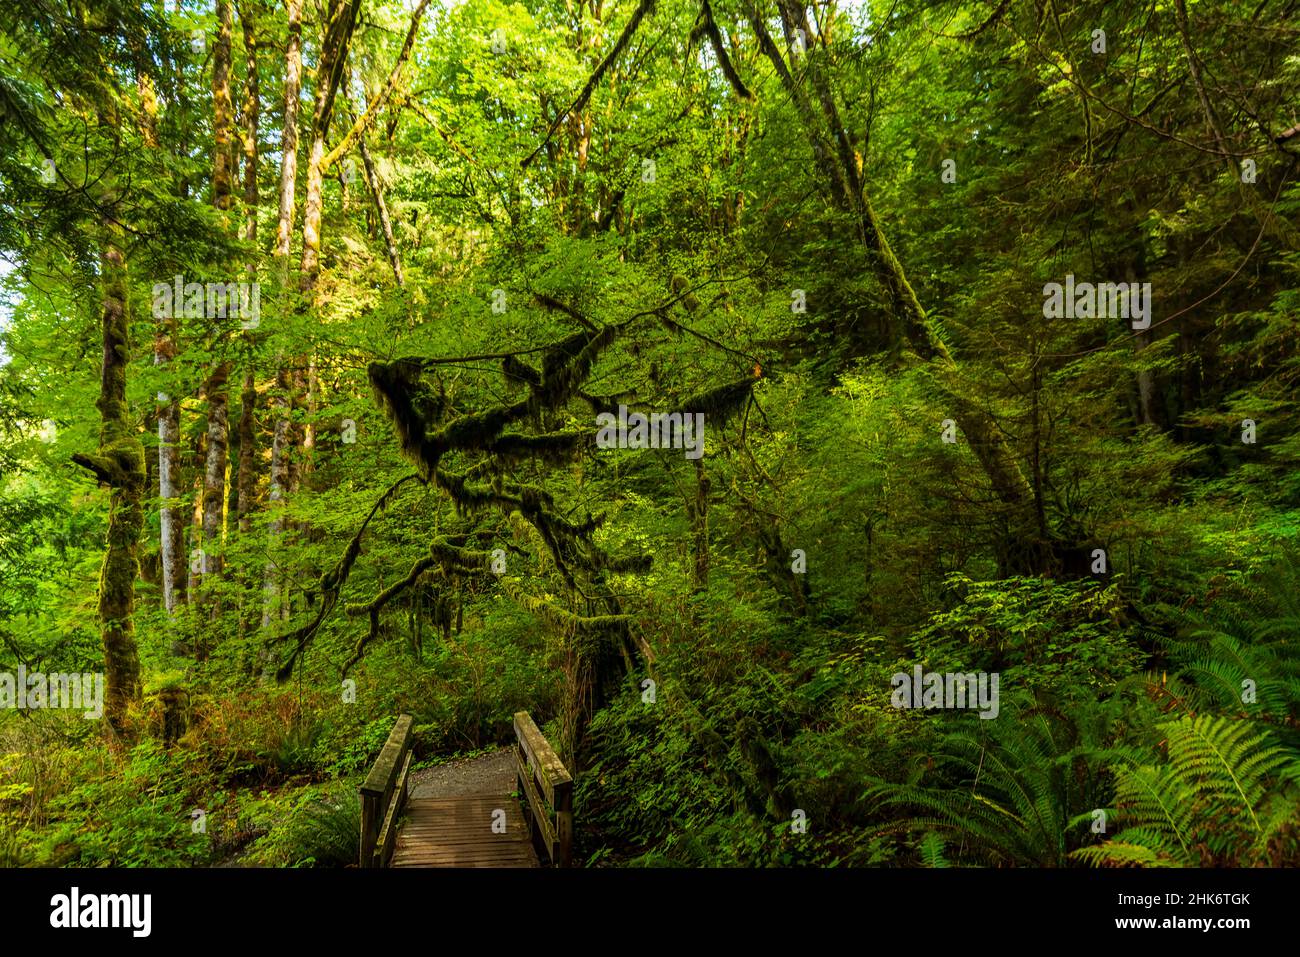 Summer day in the forest with wooden bridge, path and trees covered with green moss Stock Photo